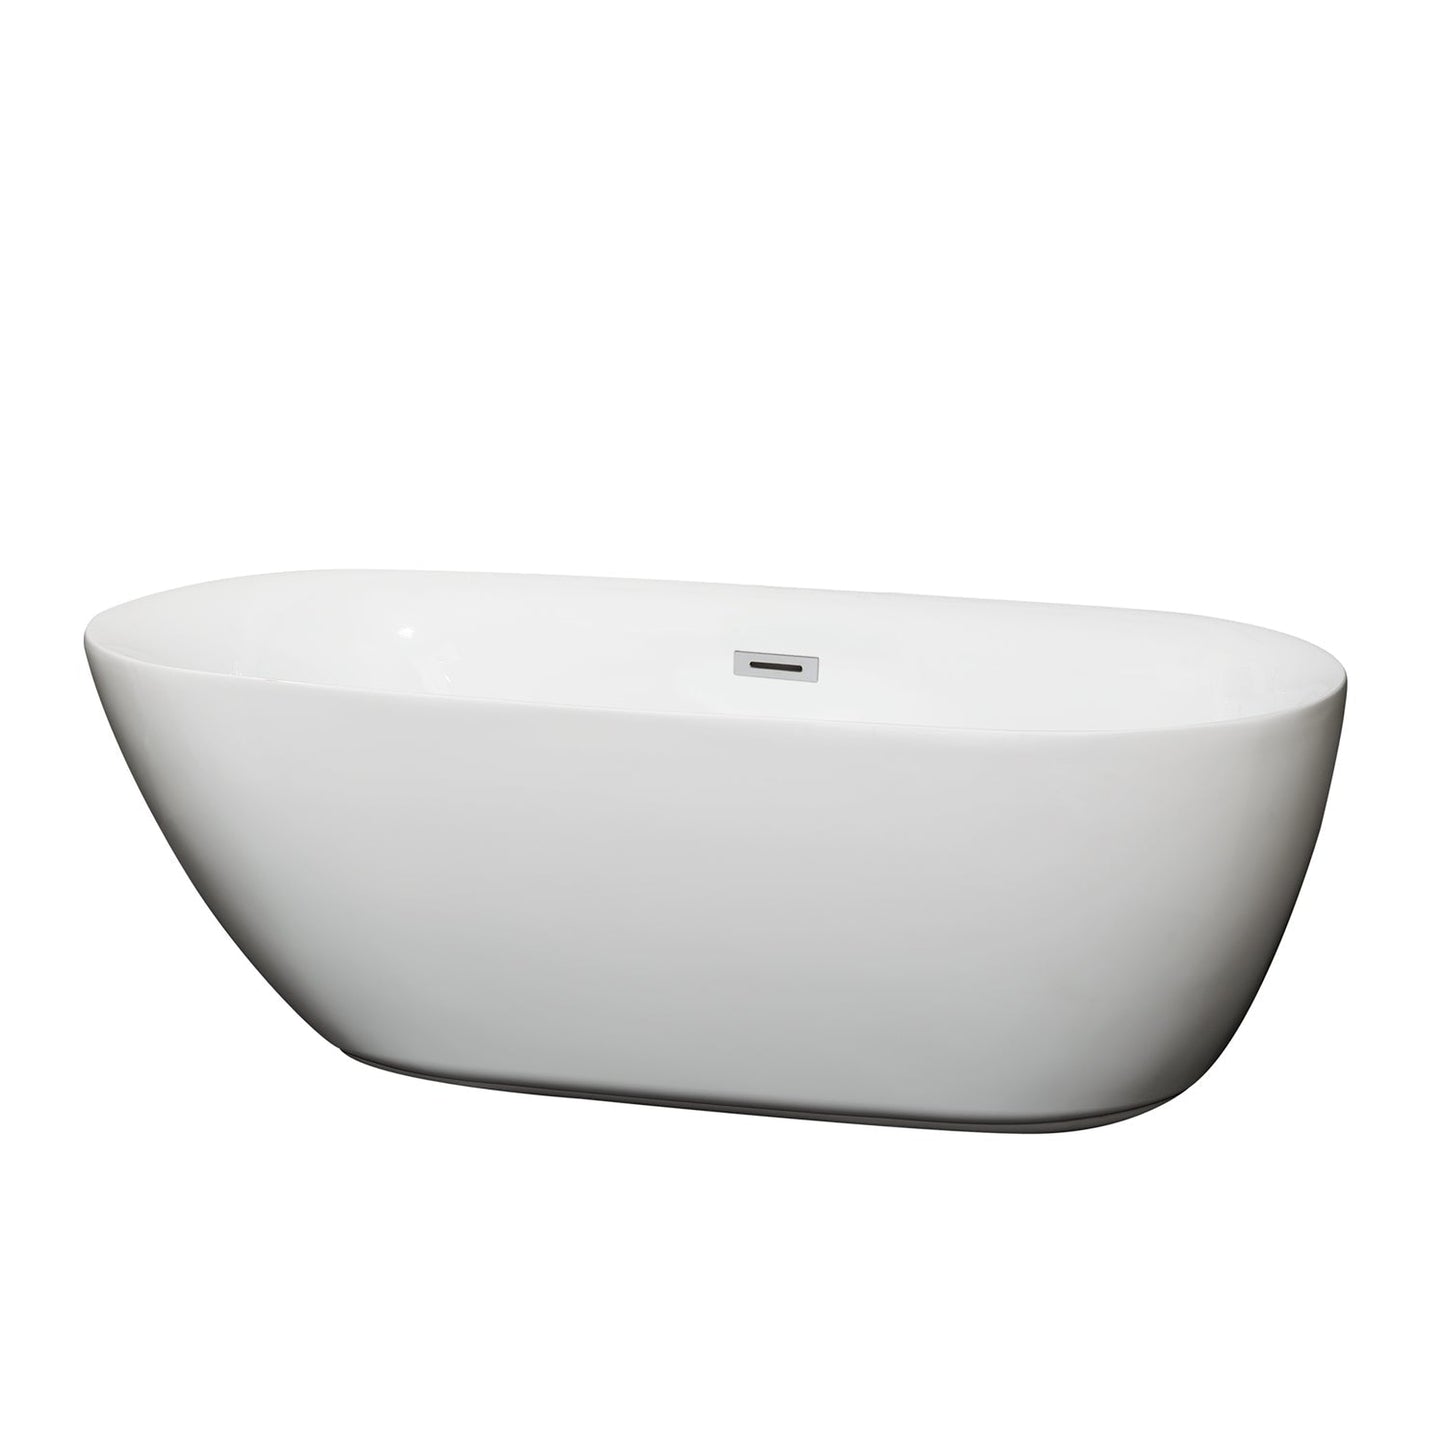 Wyndham Collection Melissa 65" Freestanding Bathtub in White With Polished Chrome Drain and Overflow Trim